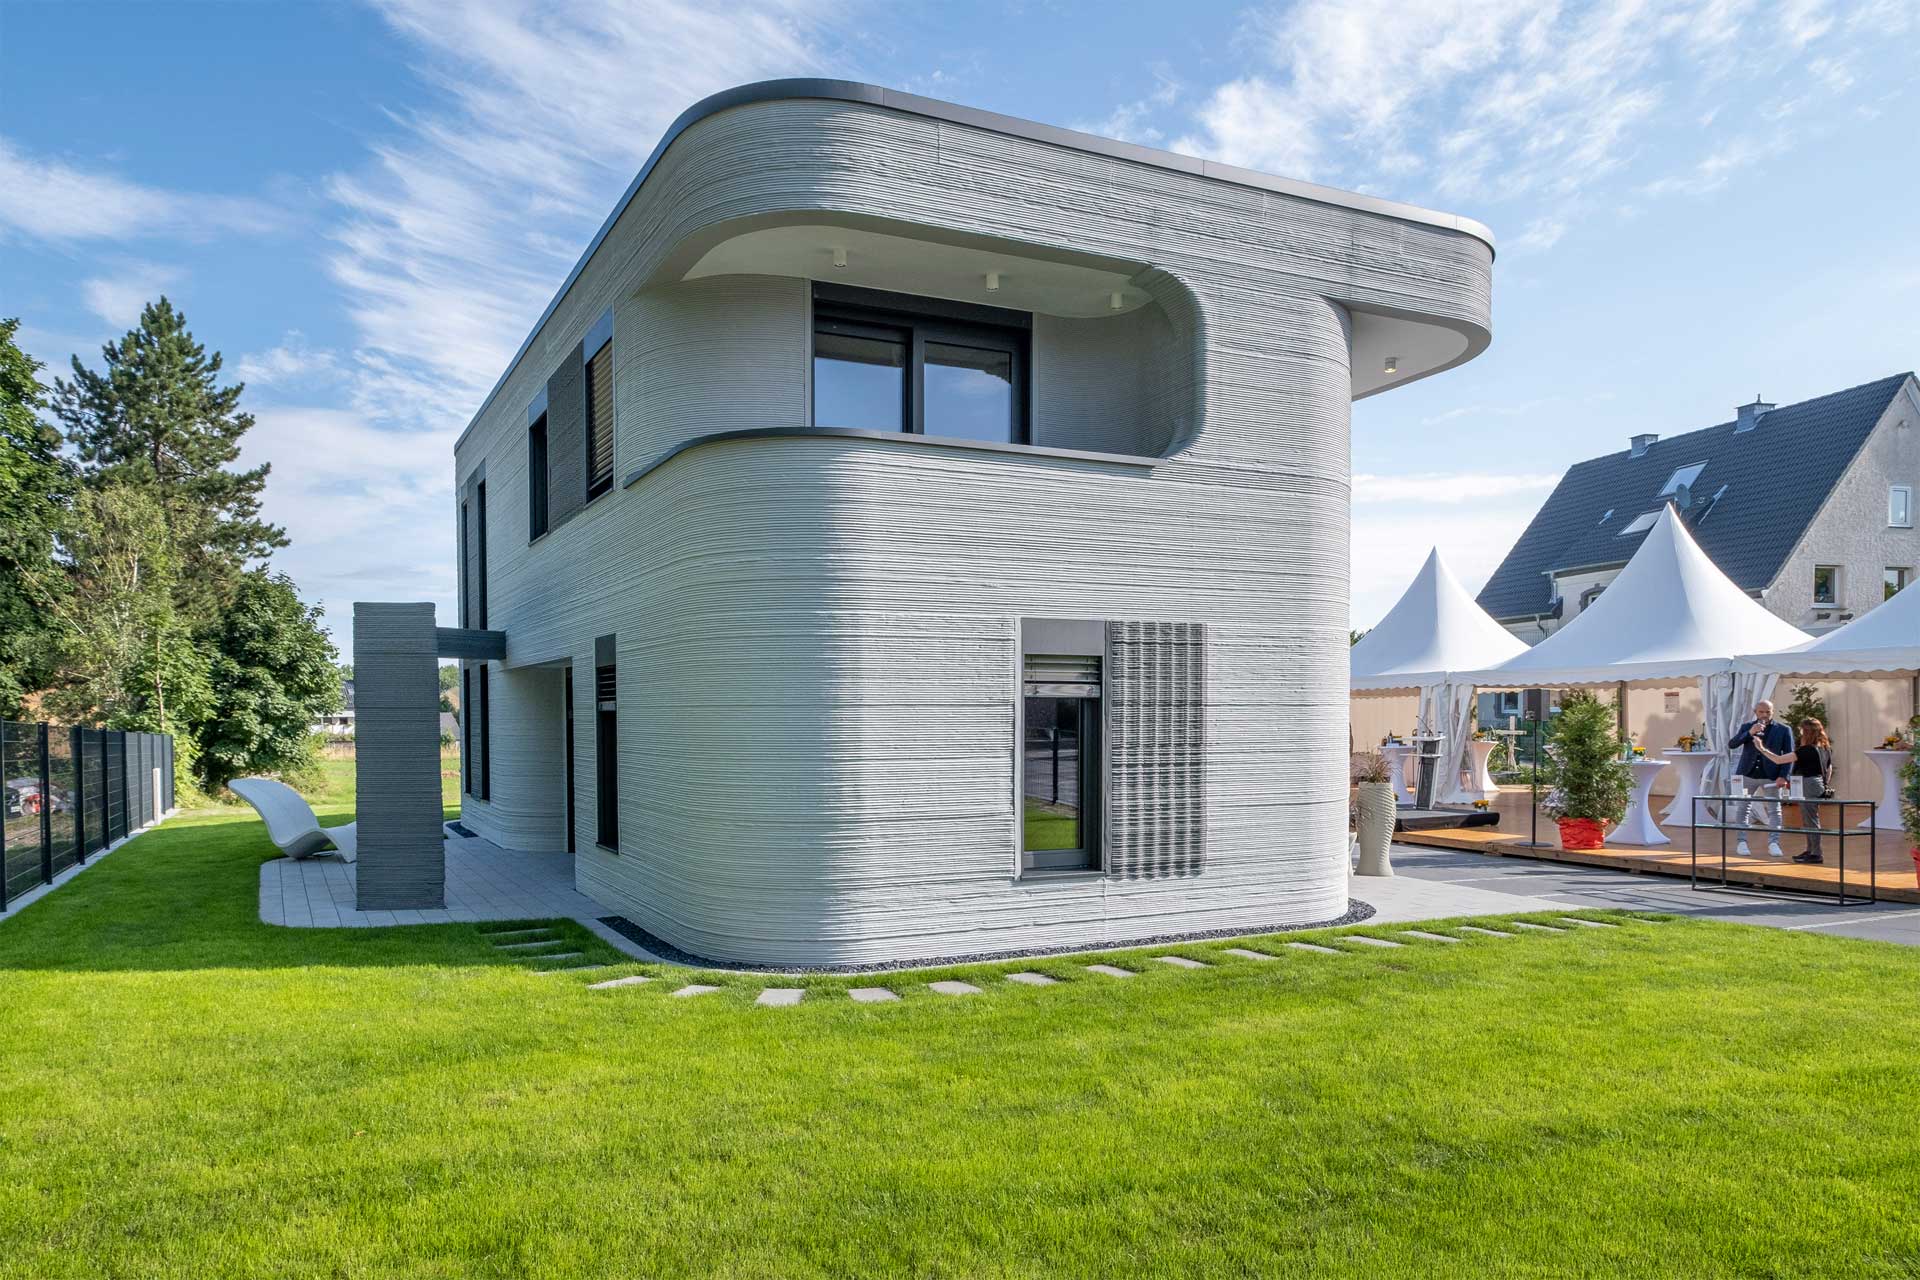 Modern two-story house with curved design and textured exterior, set on manicured lawn under blue sky